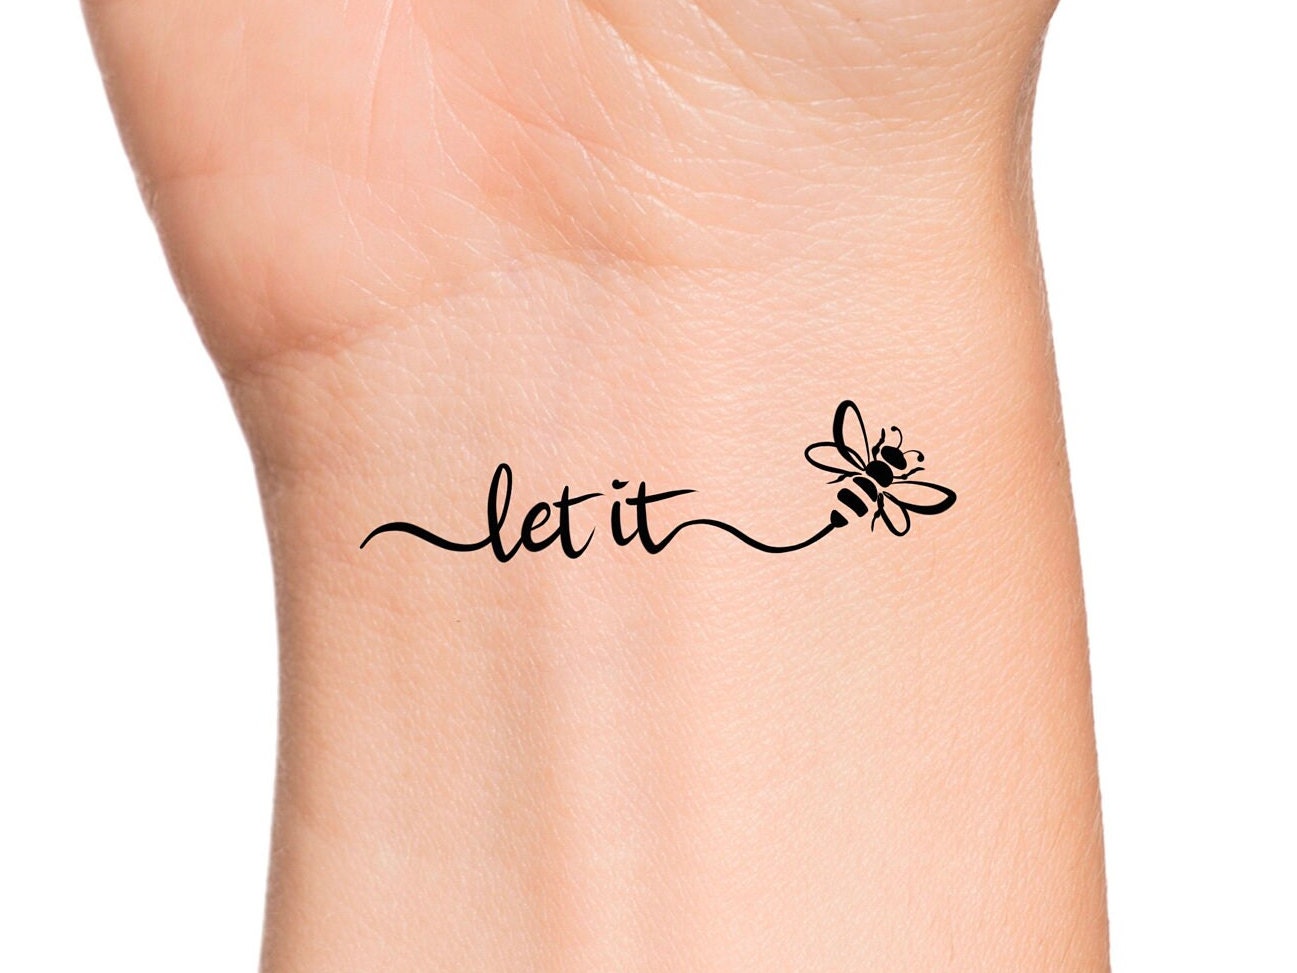 7. Extended Wear Stick-On Tattoos - wide 10